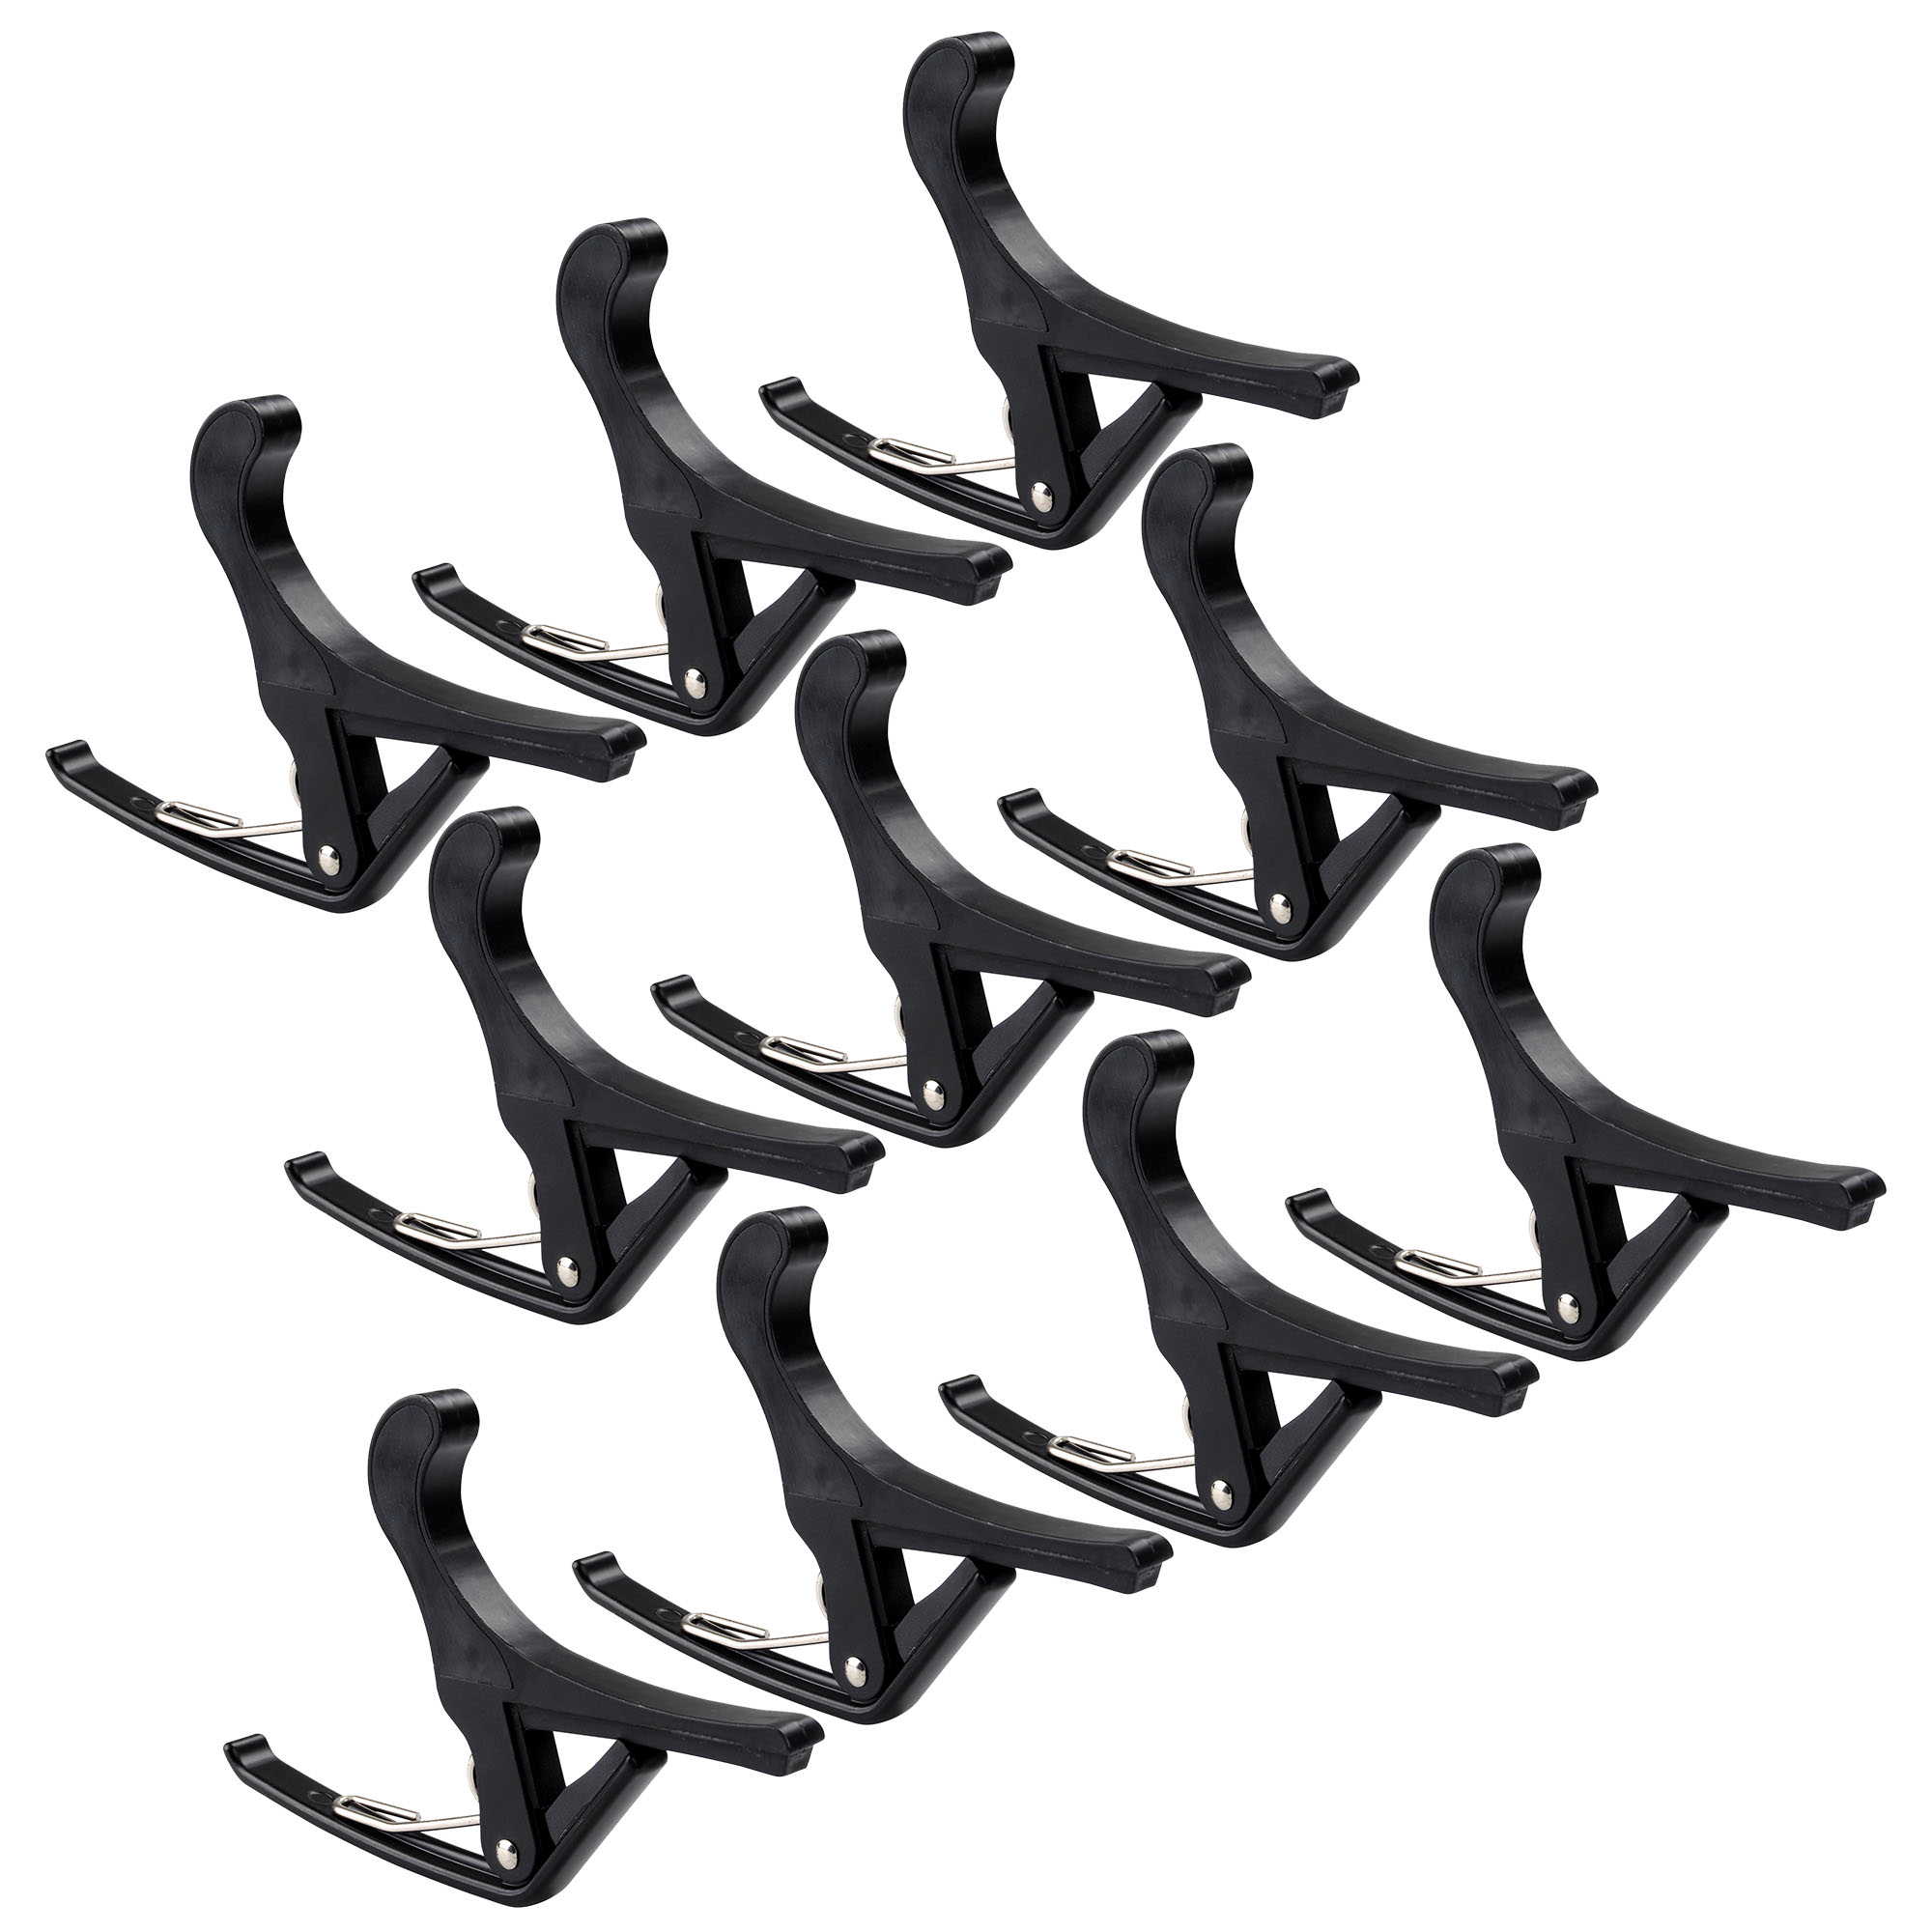 Yescom Guitar Capo Tune Clamp Accessories for Acoustic Electric Guitar Ukulele 10 Packs